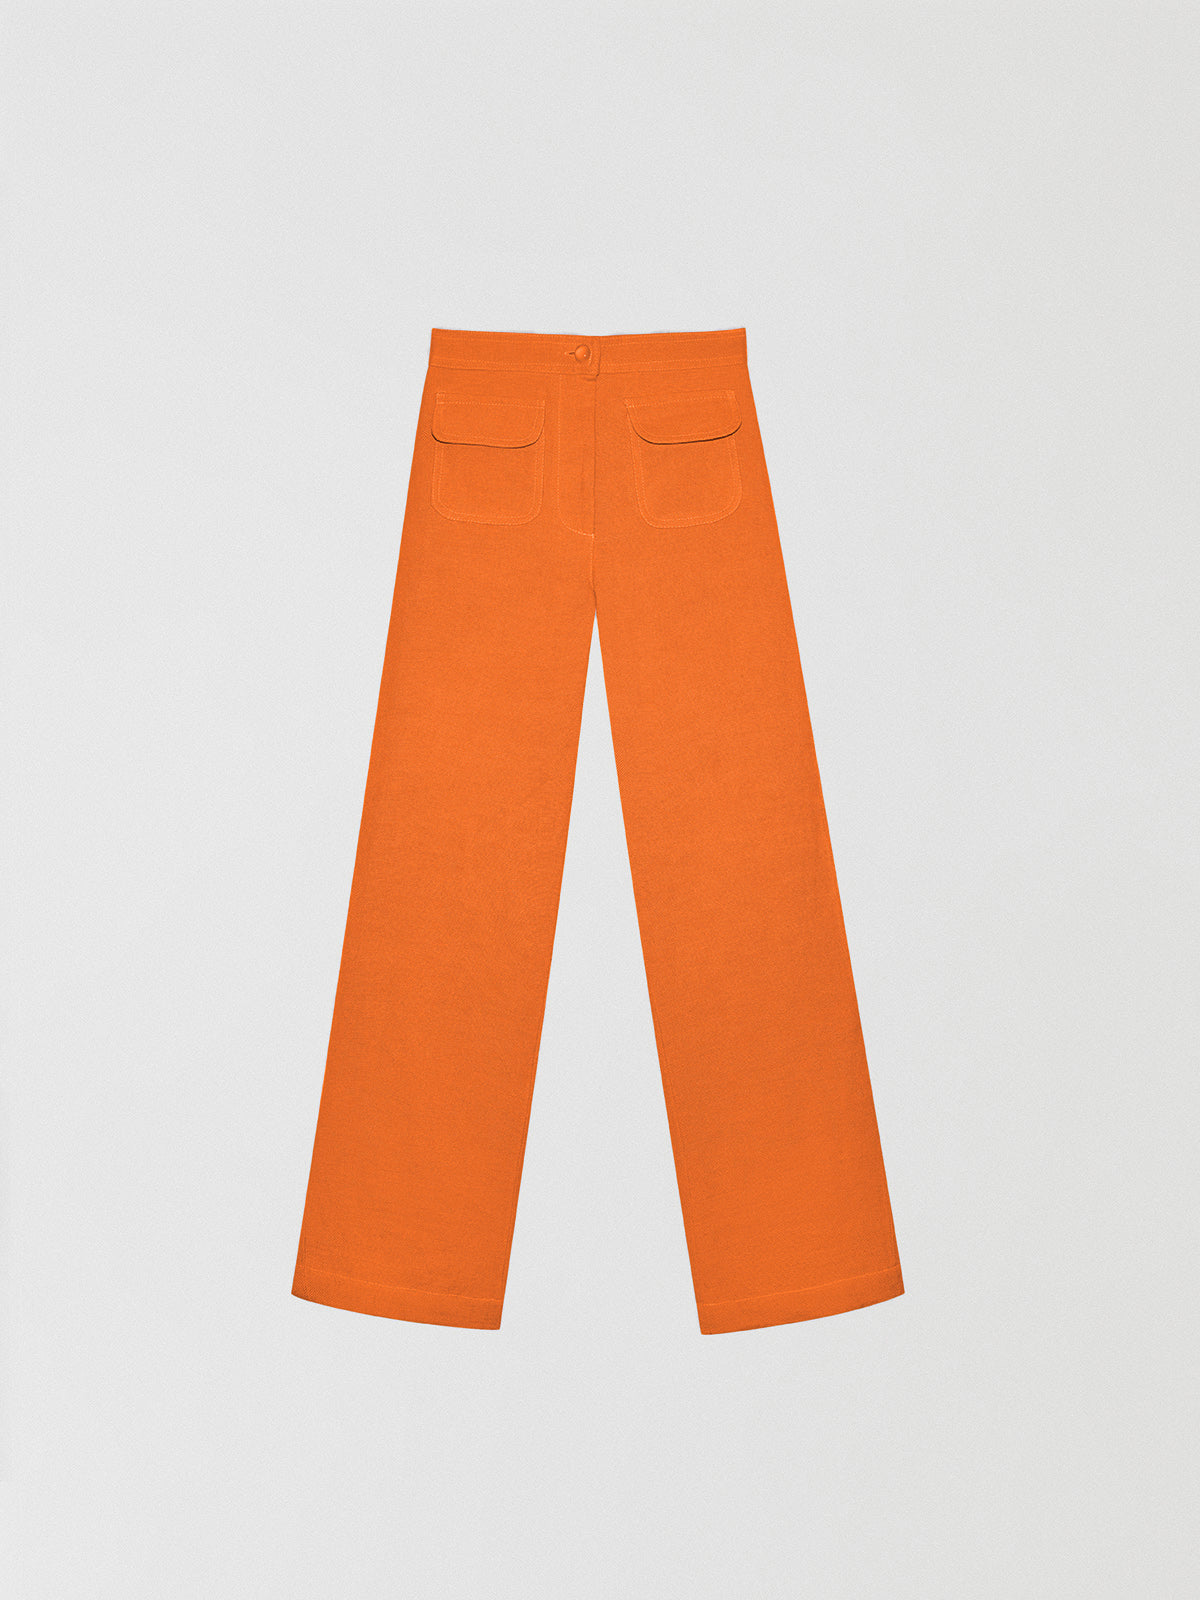 Orange high-waisted linen trousers with pockets. 